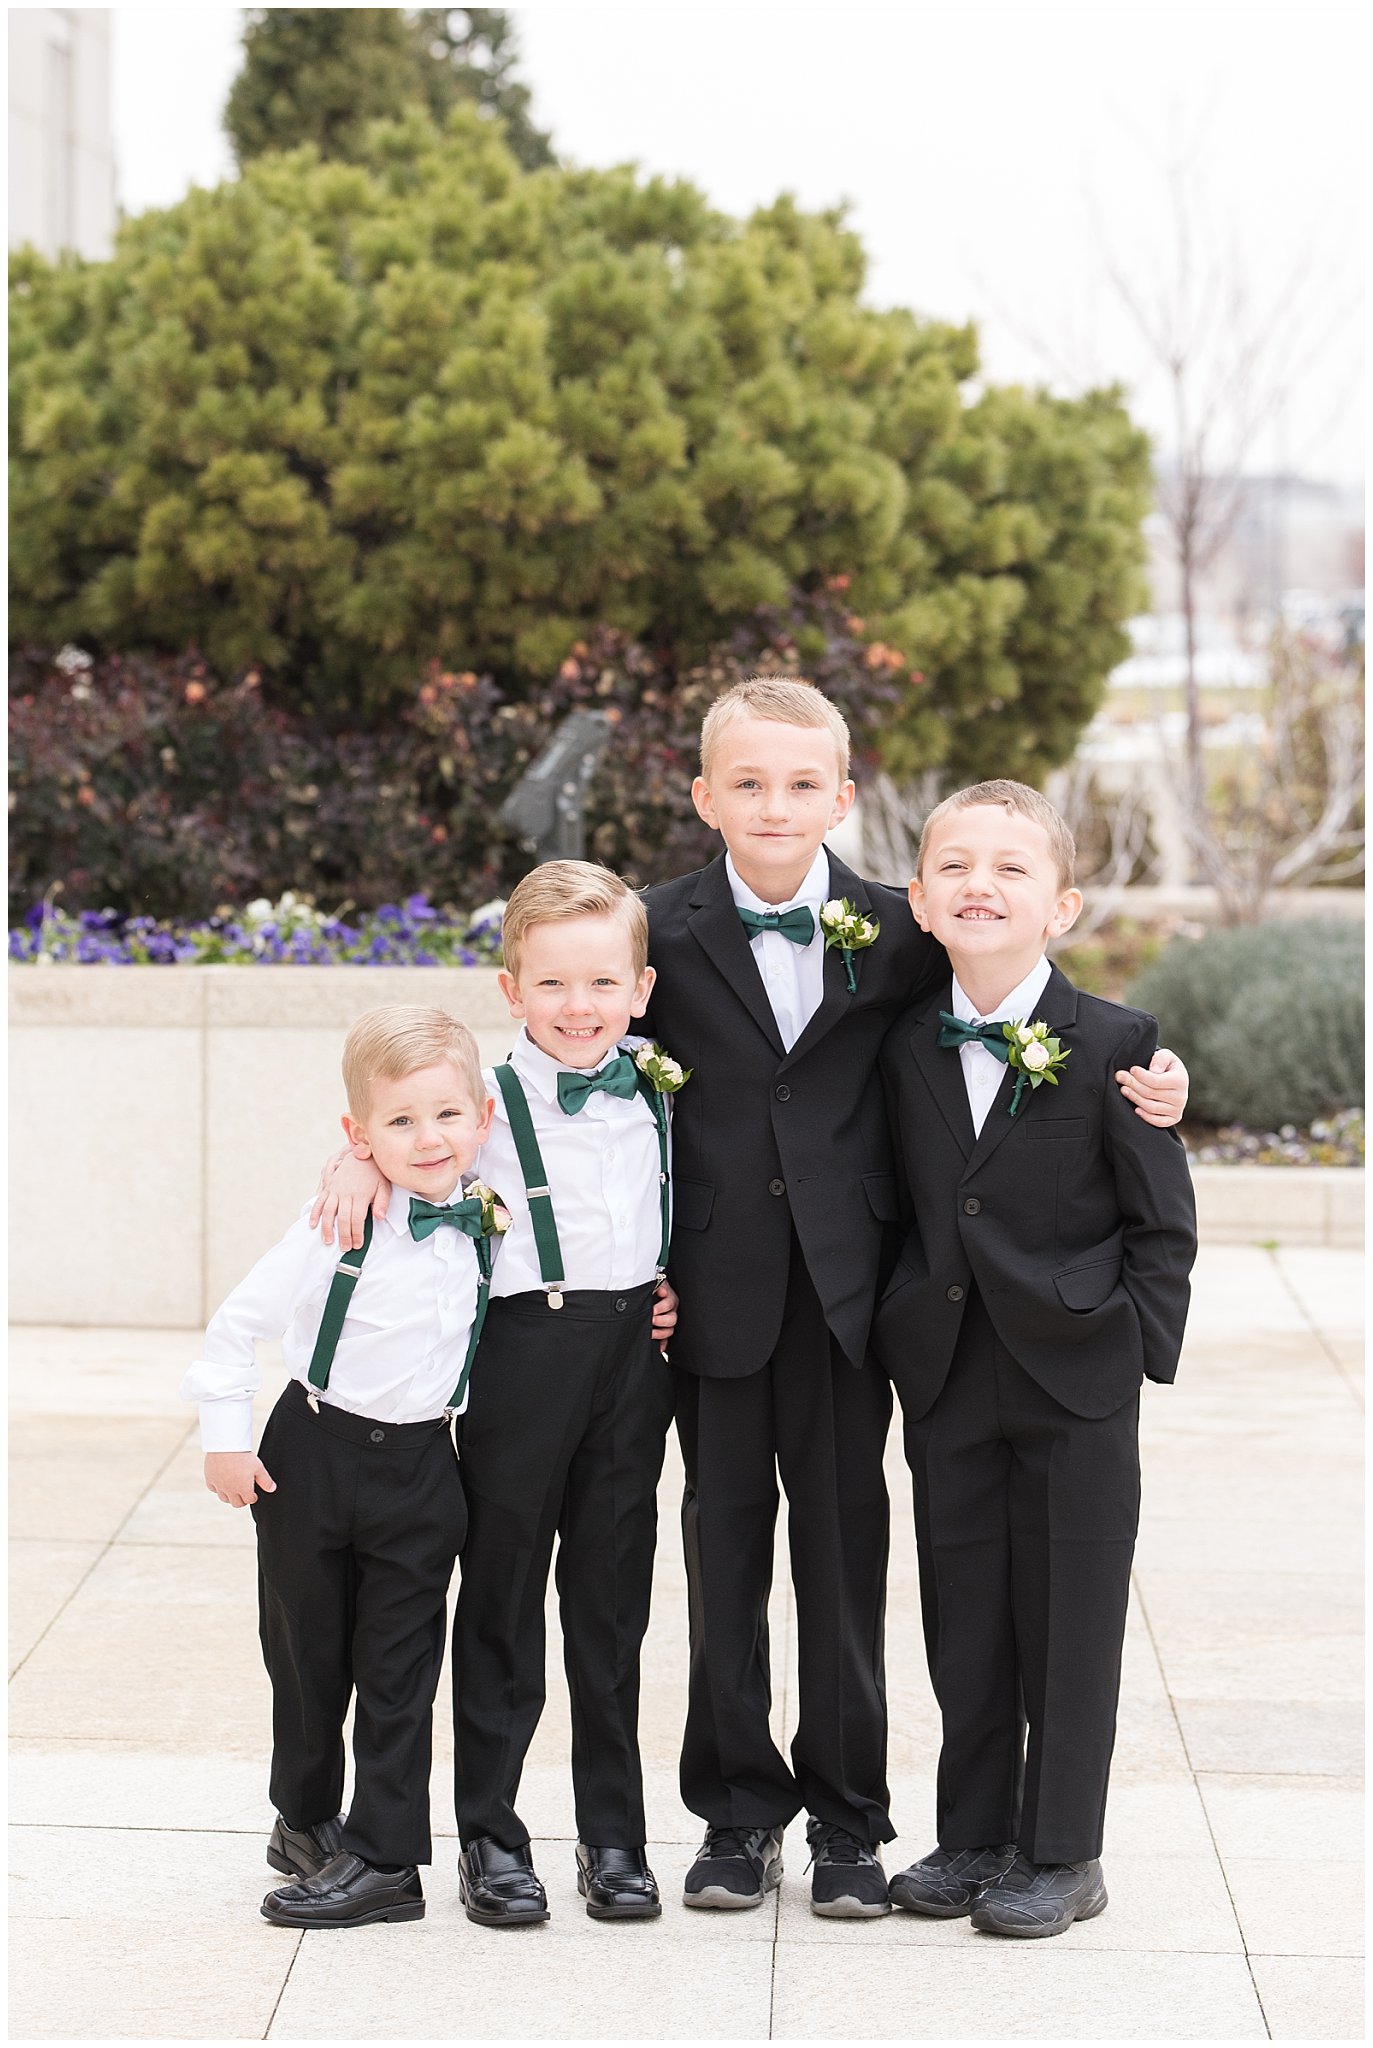 Four ring bearers in green bowties, suits and suspenders | Ogden Temple Winter Wedding | Emerald Green and Pink Wedding | Jessie and Dallin Photography